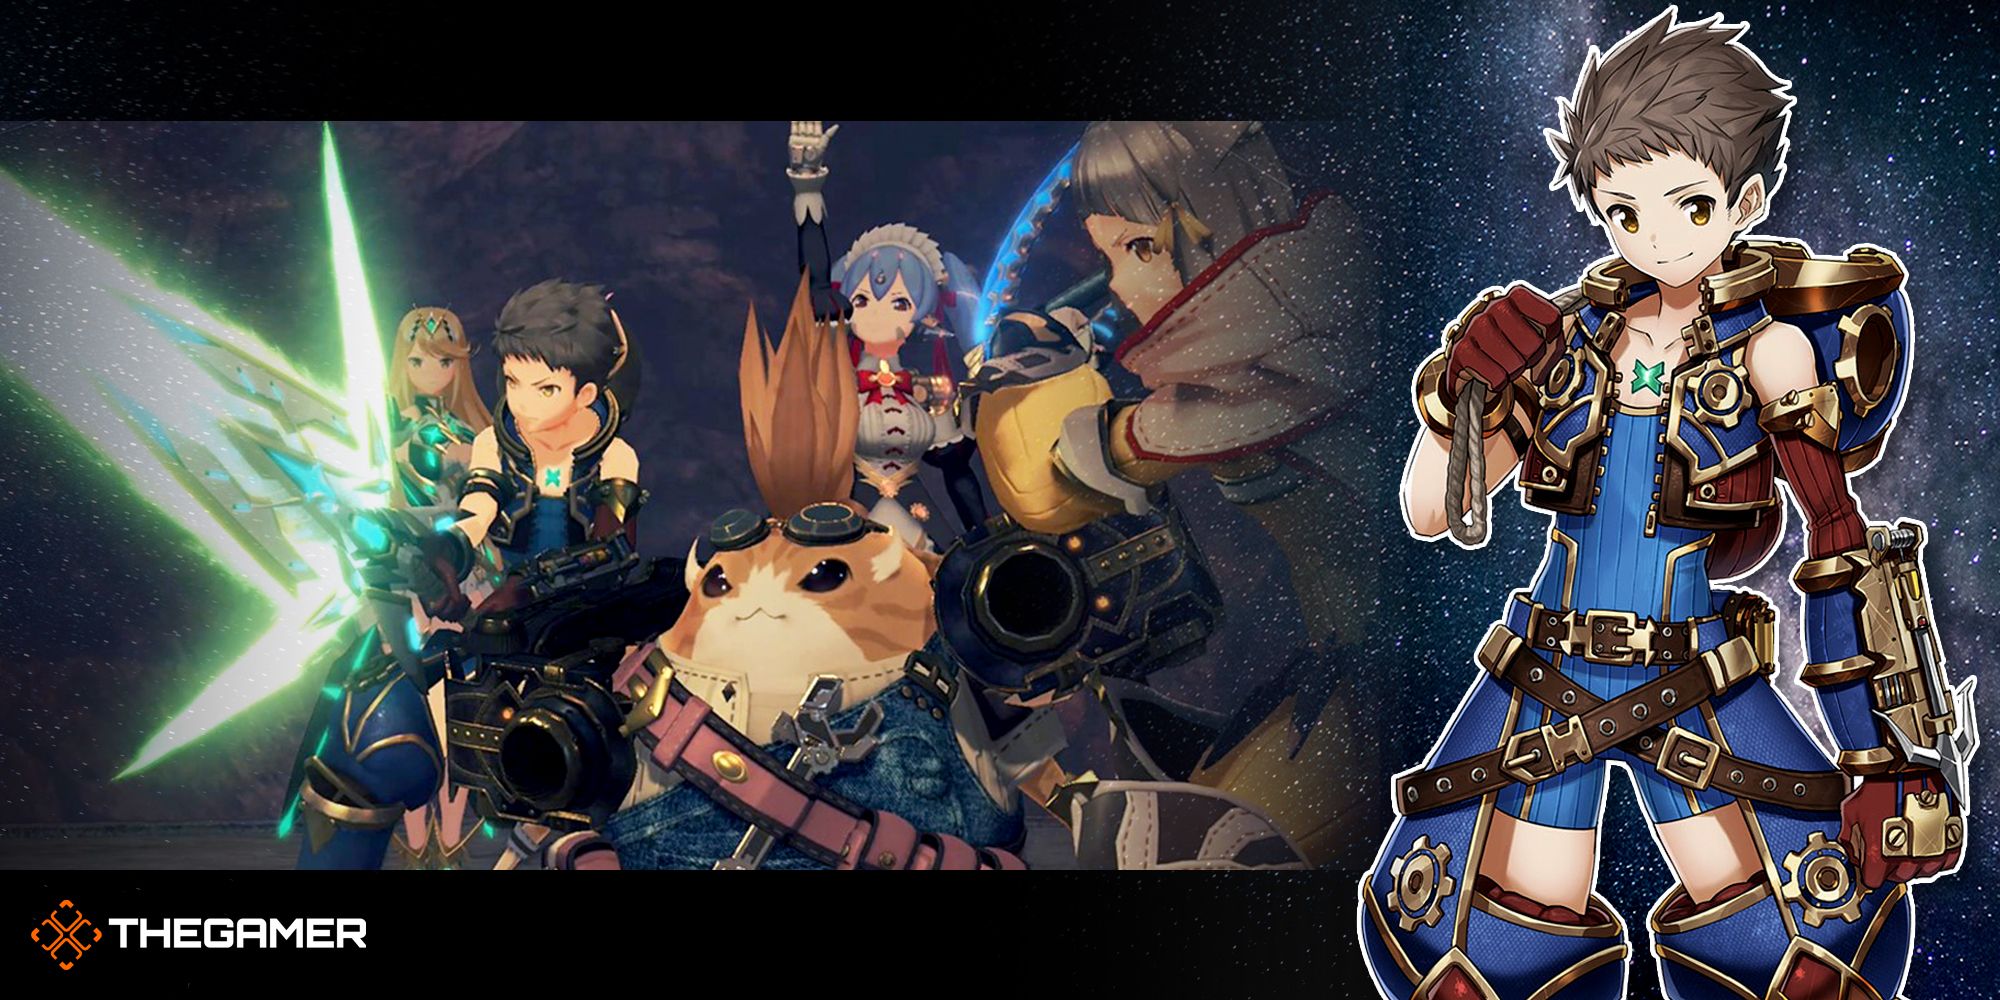 Image of team fighting and Rex art from Xenoblade Chronicles 2